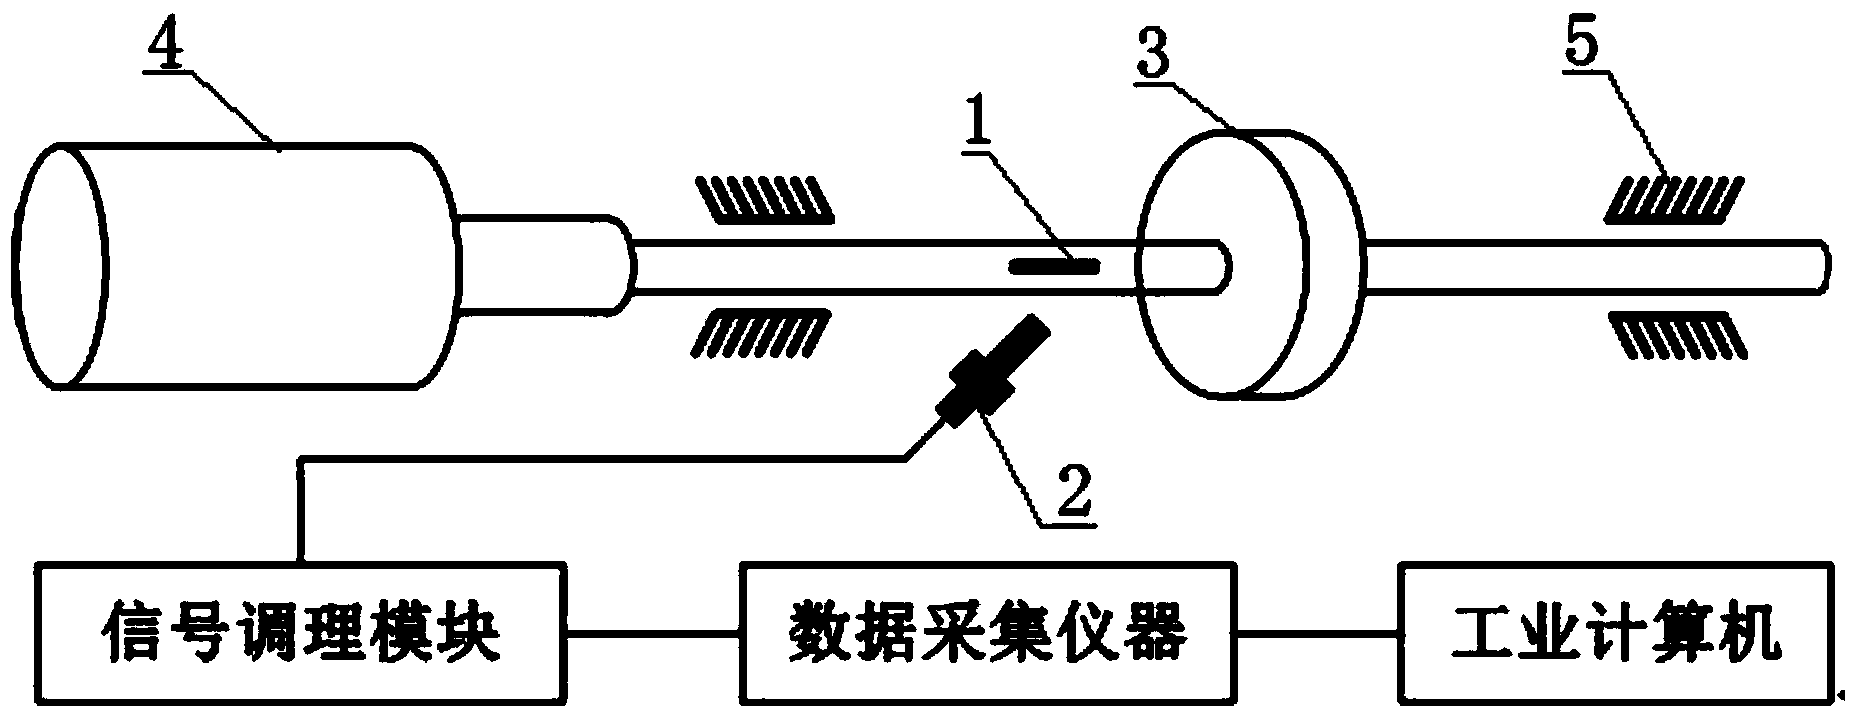 Dynamic balancing method for high-speed rotors